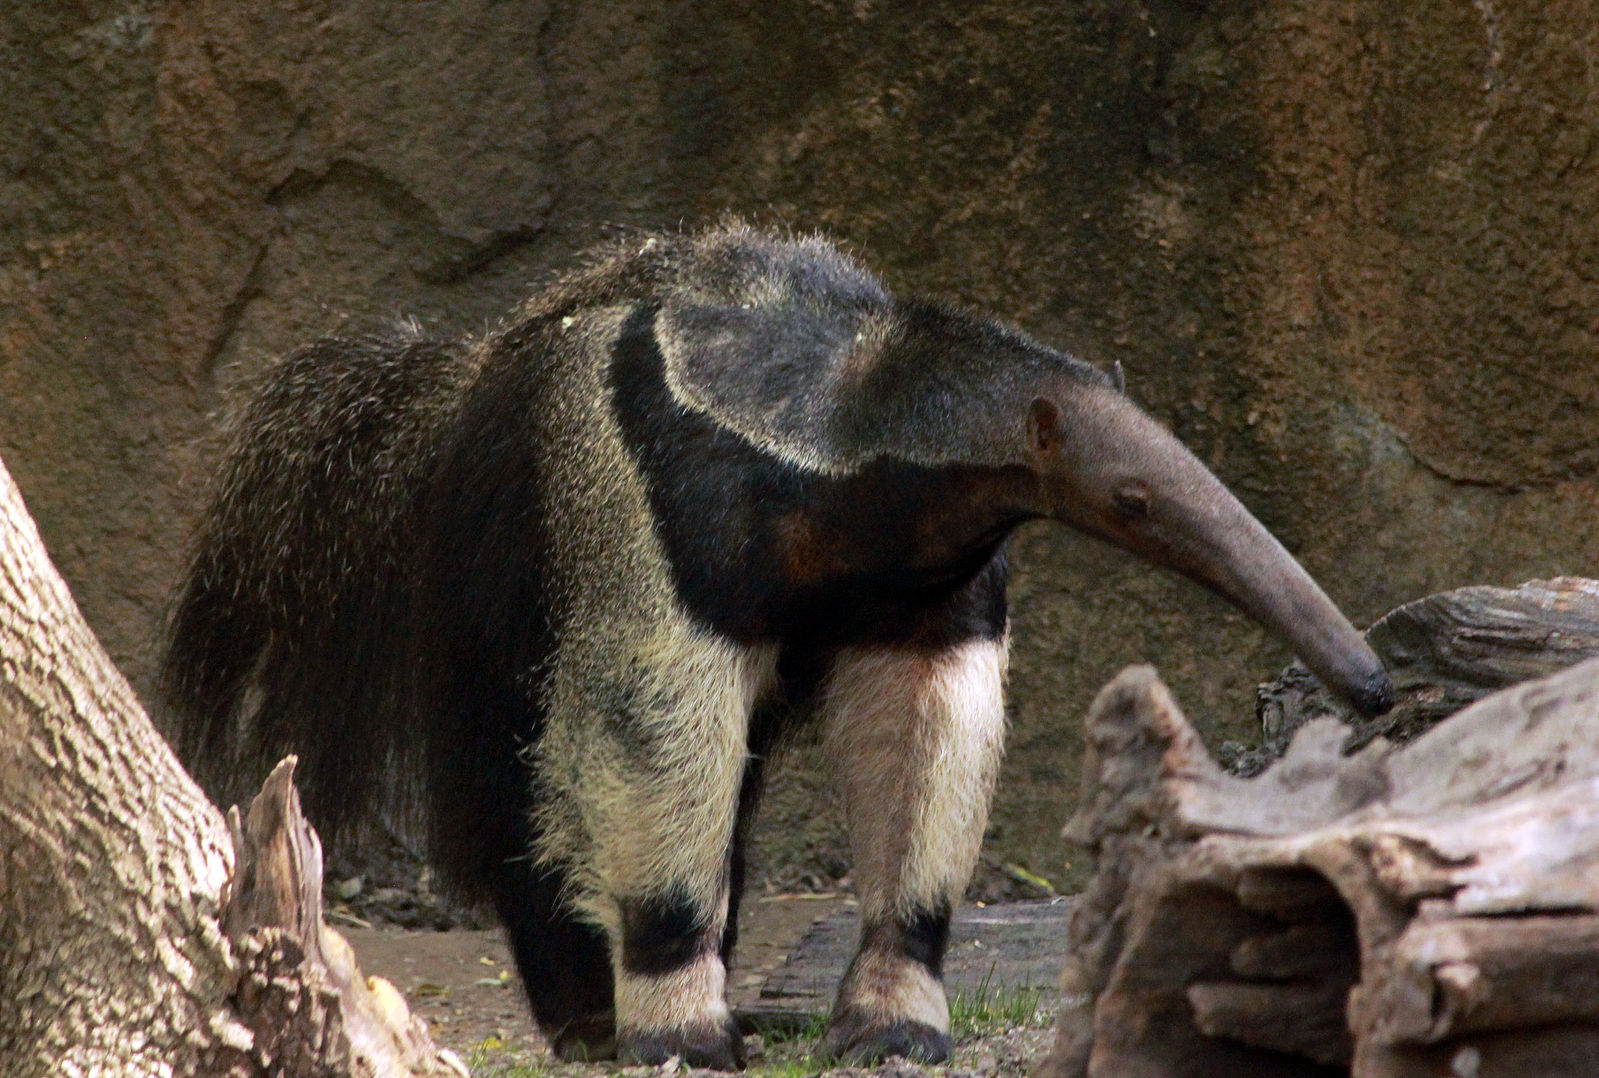 Difference Between Arm adillo and Anteater